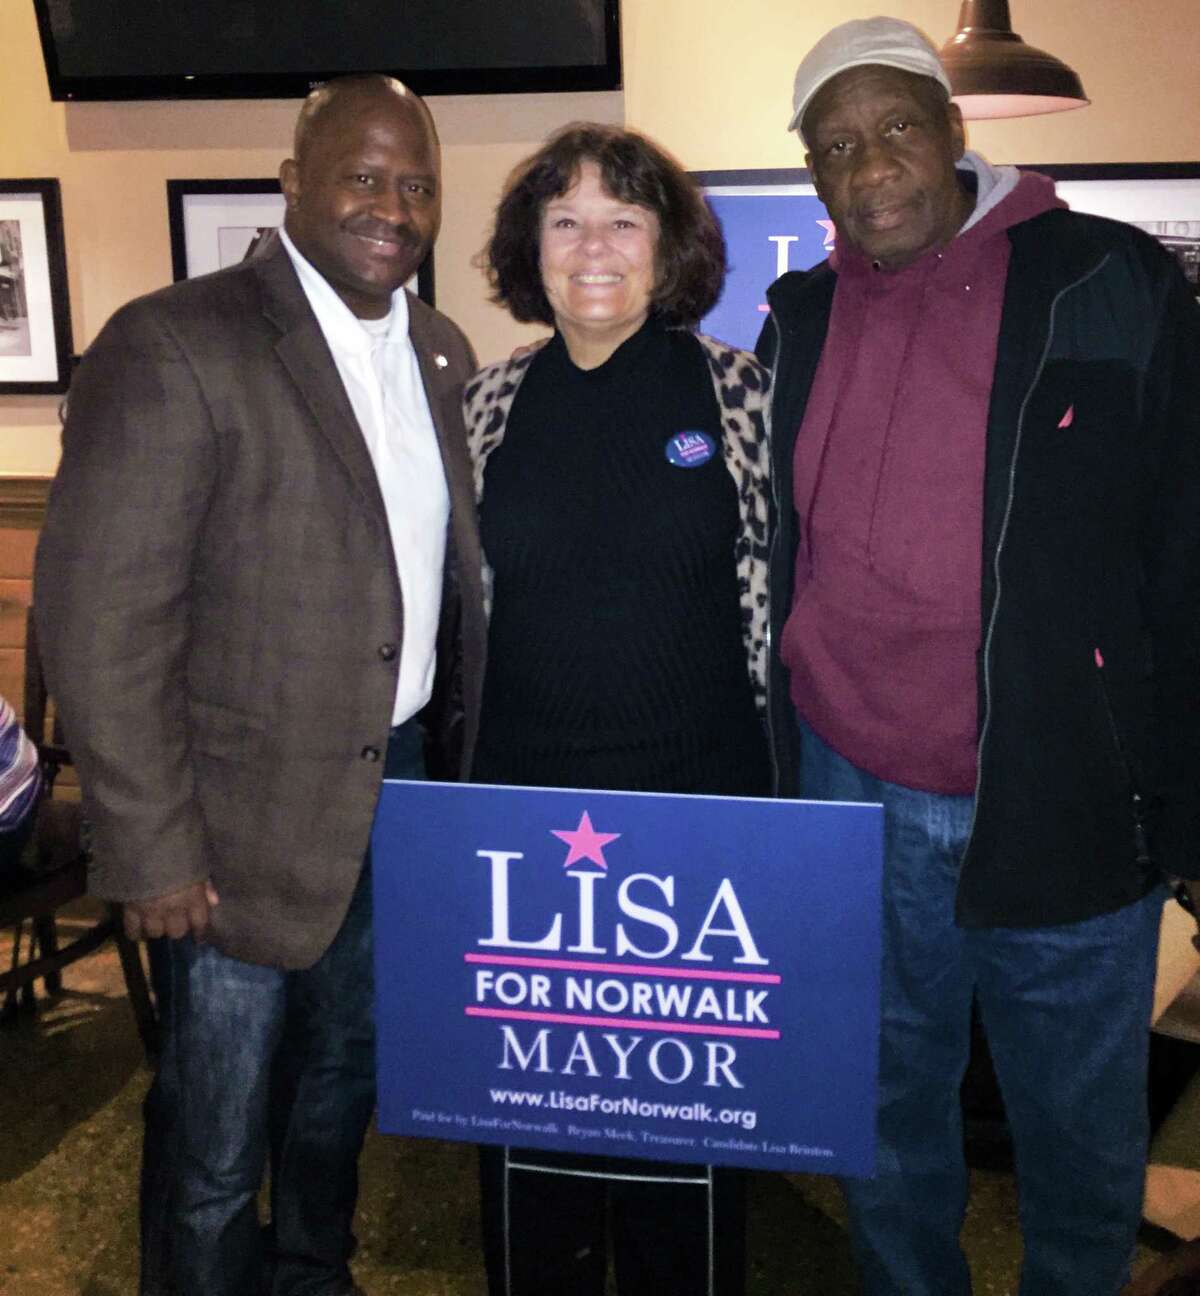 Two Democrats - state Rep. Travis Simms, D-140, and Common Council member Ernie Dumas - endorsed unaffiliated candidate Lisa Brinton for mayor.